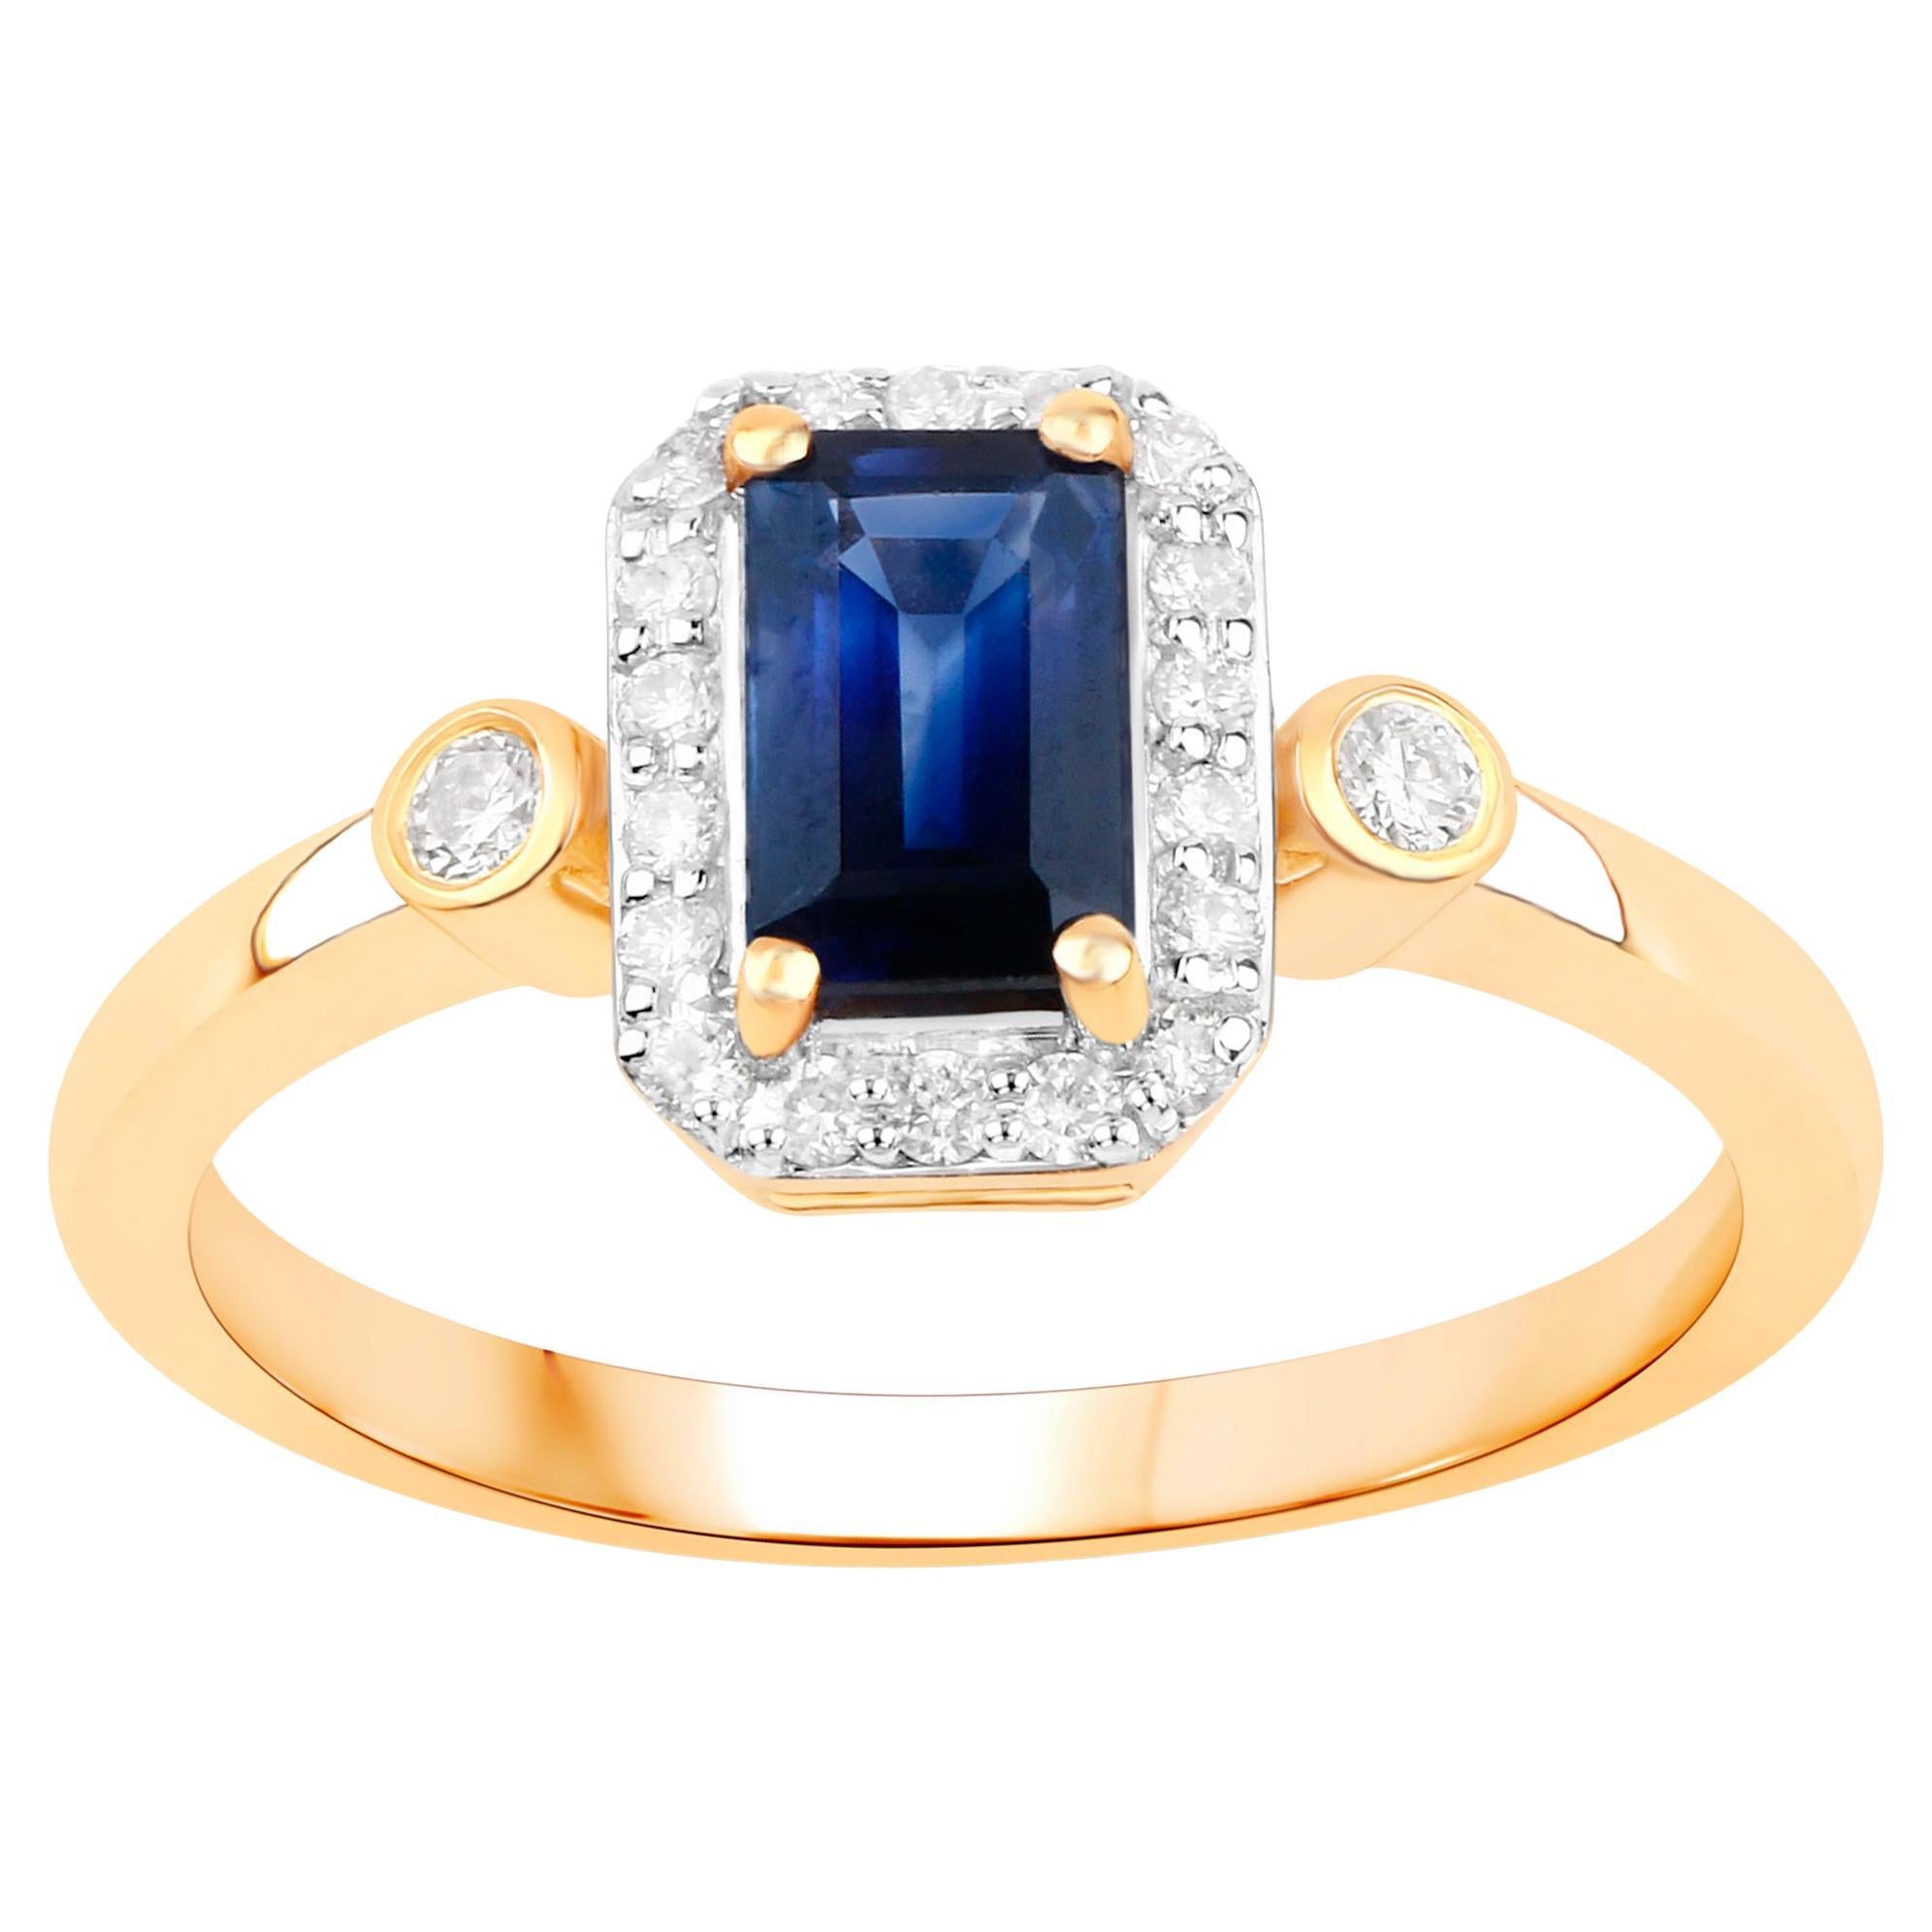 Blue Sapphire Ring With Diamonds 1.08 Carats 14K Yellow Gold